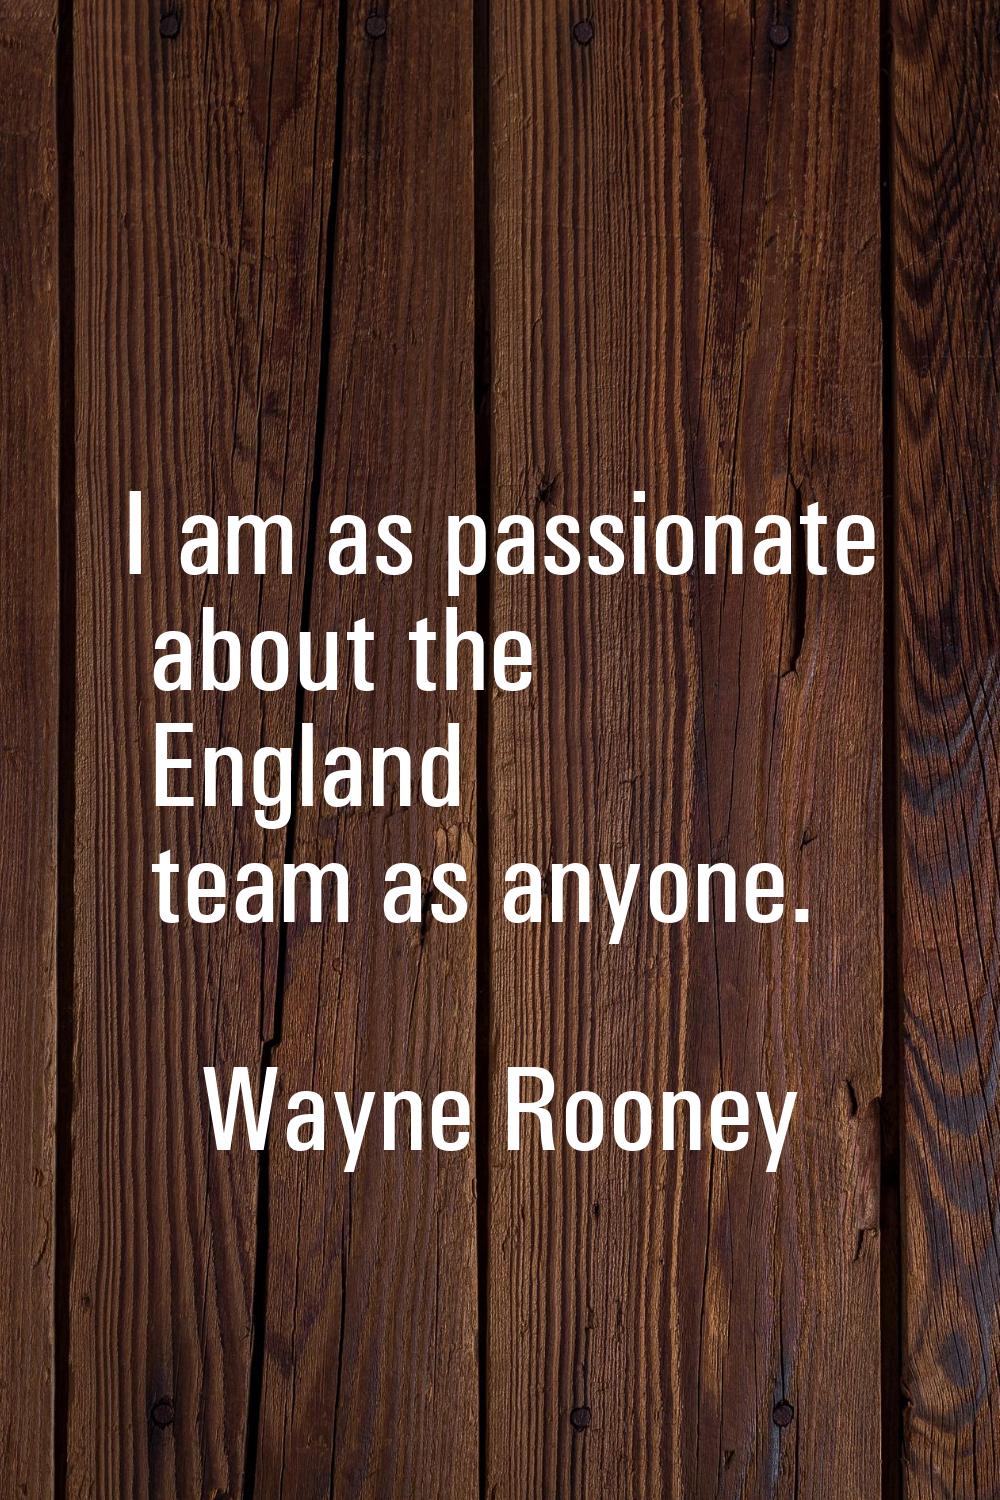 I am as passionate about the England team as anyone.